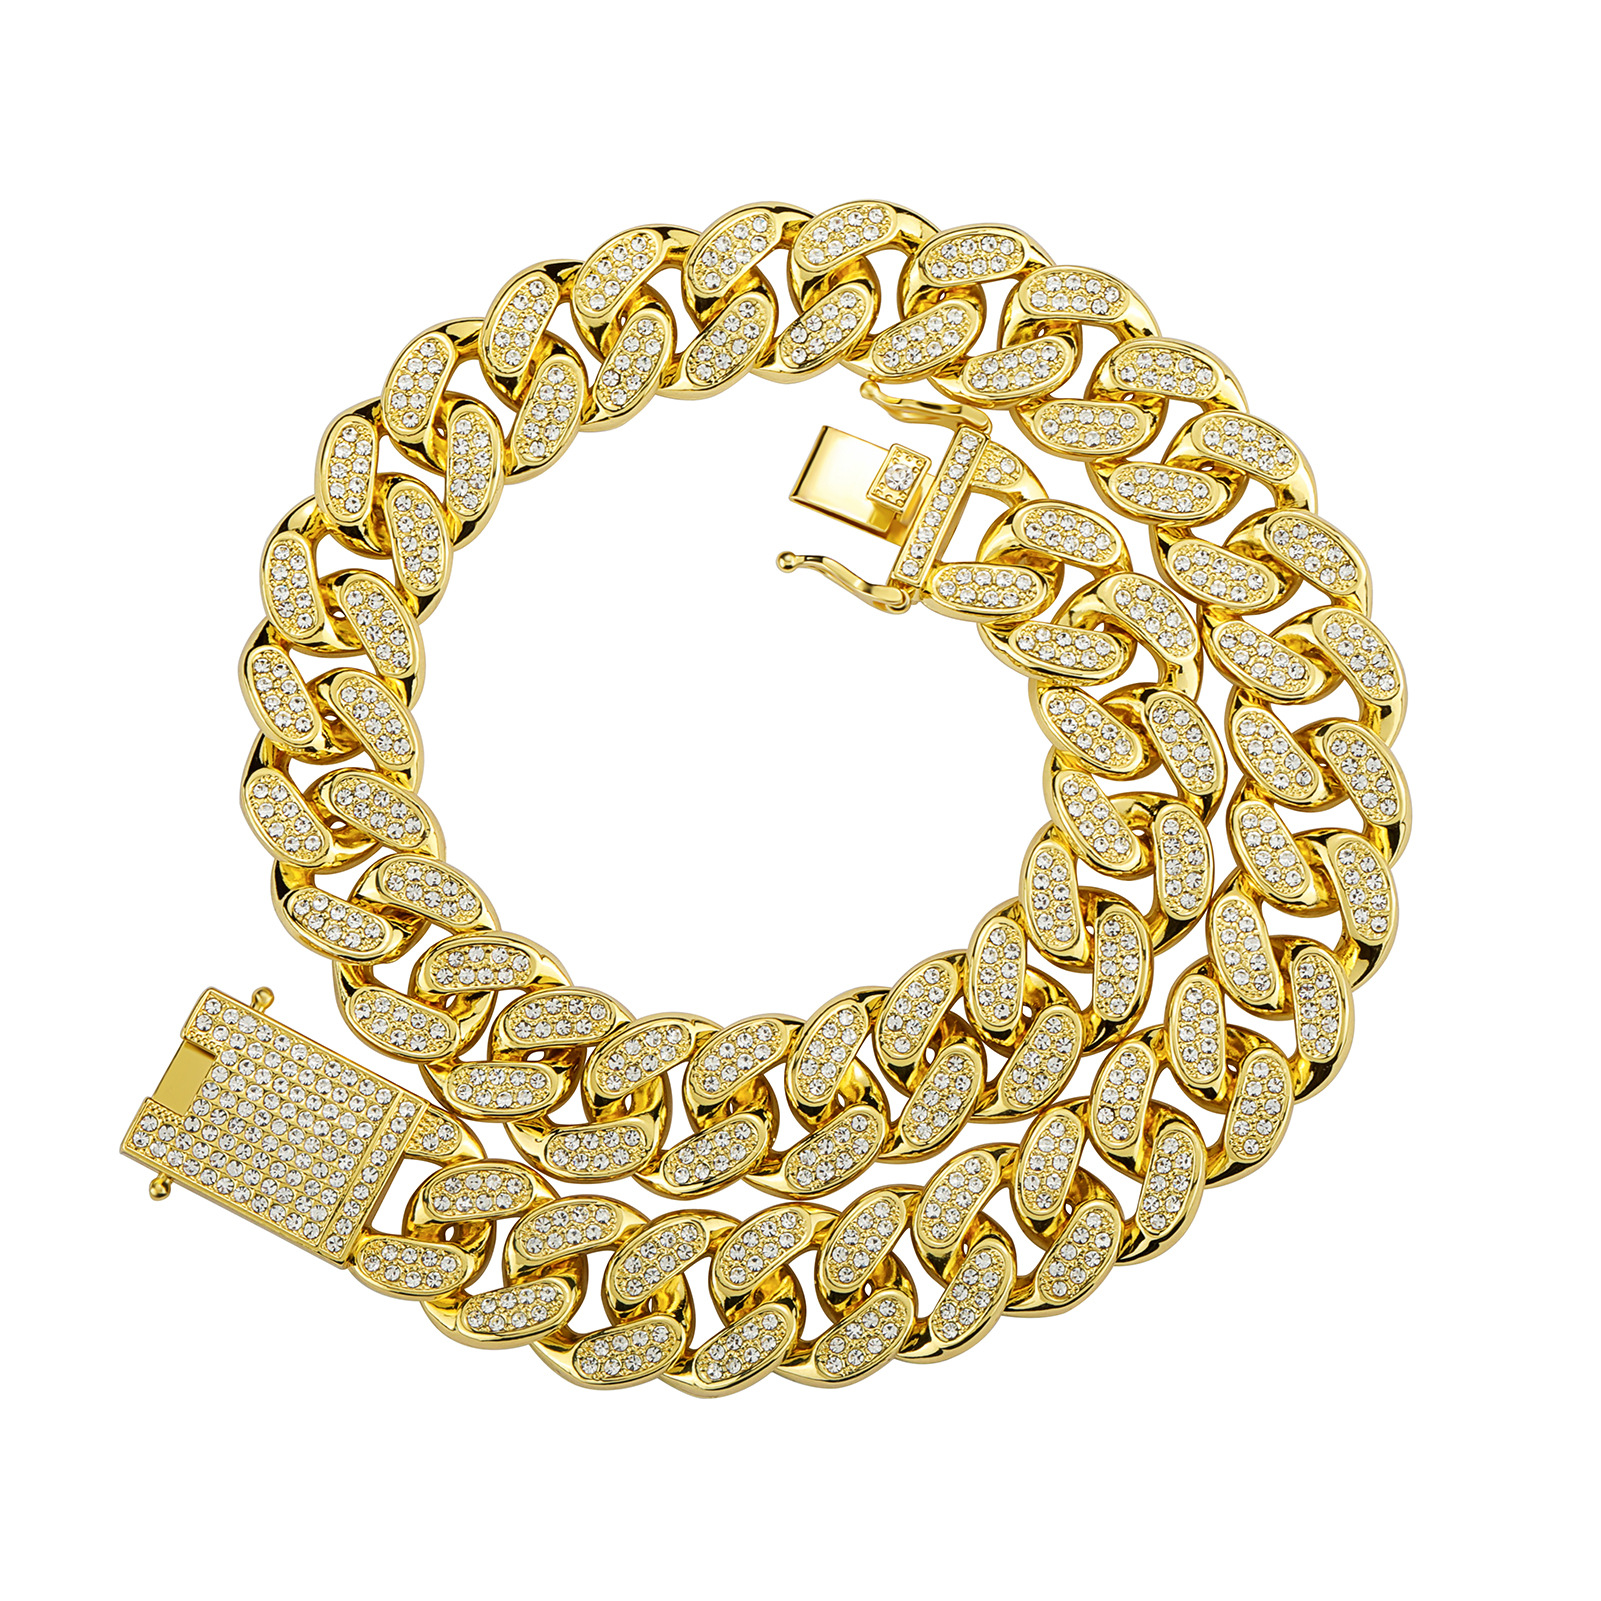 3:Necklace gold 20 inch